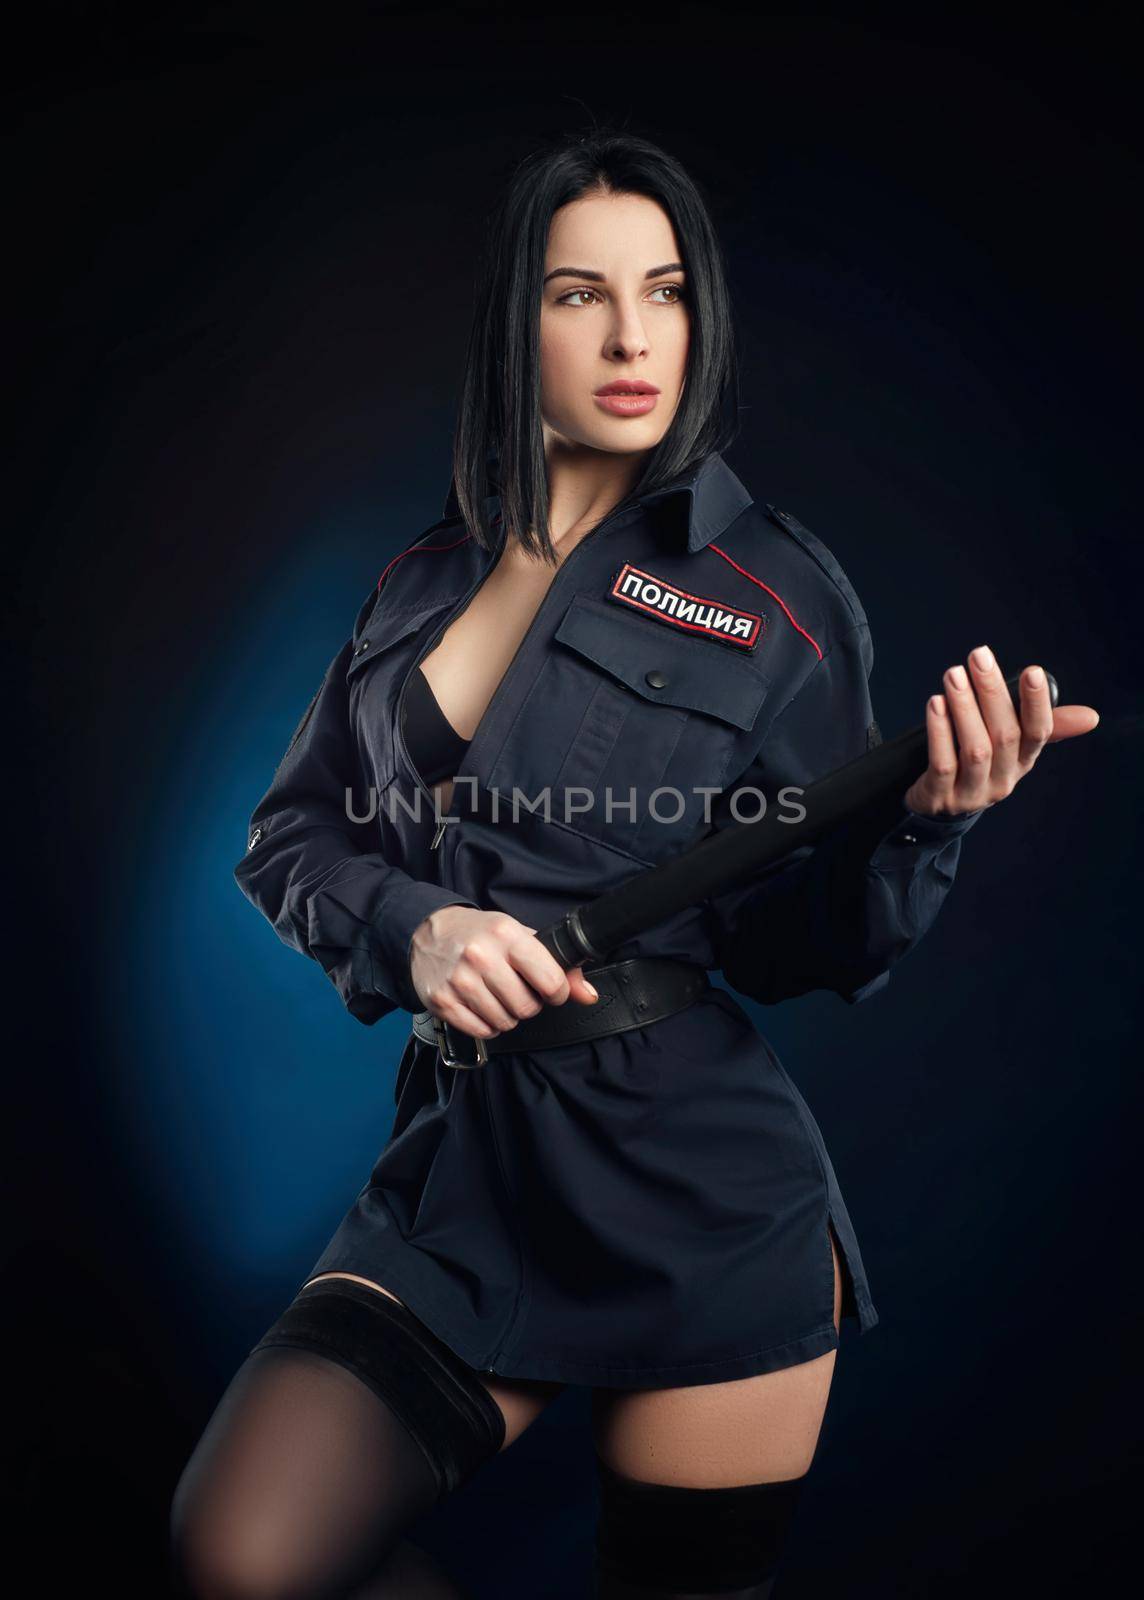 Portrait of a woman in a Russian police uniform with a baton English translation police by Rotozey